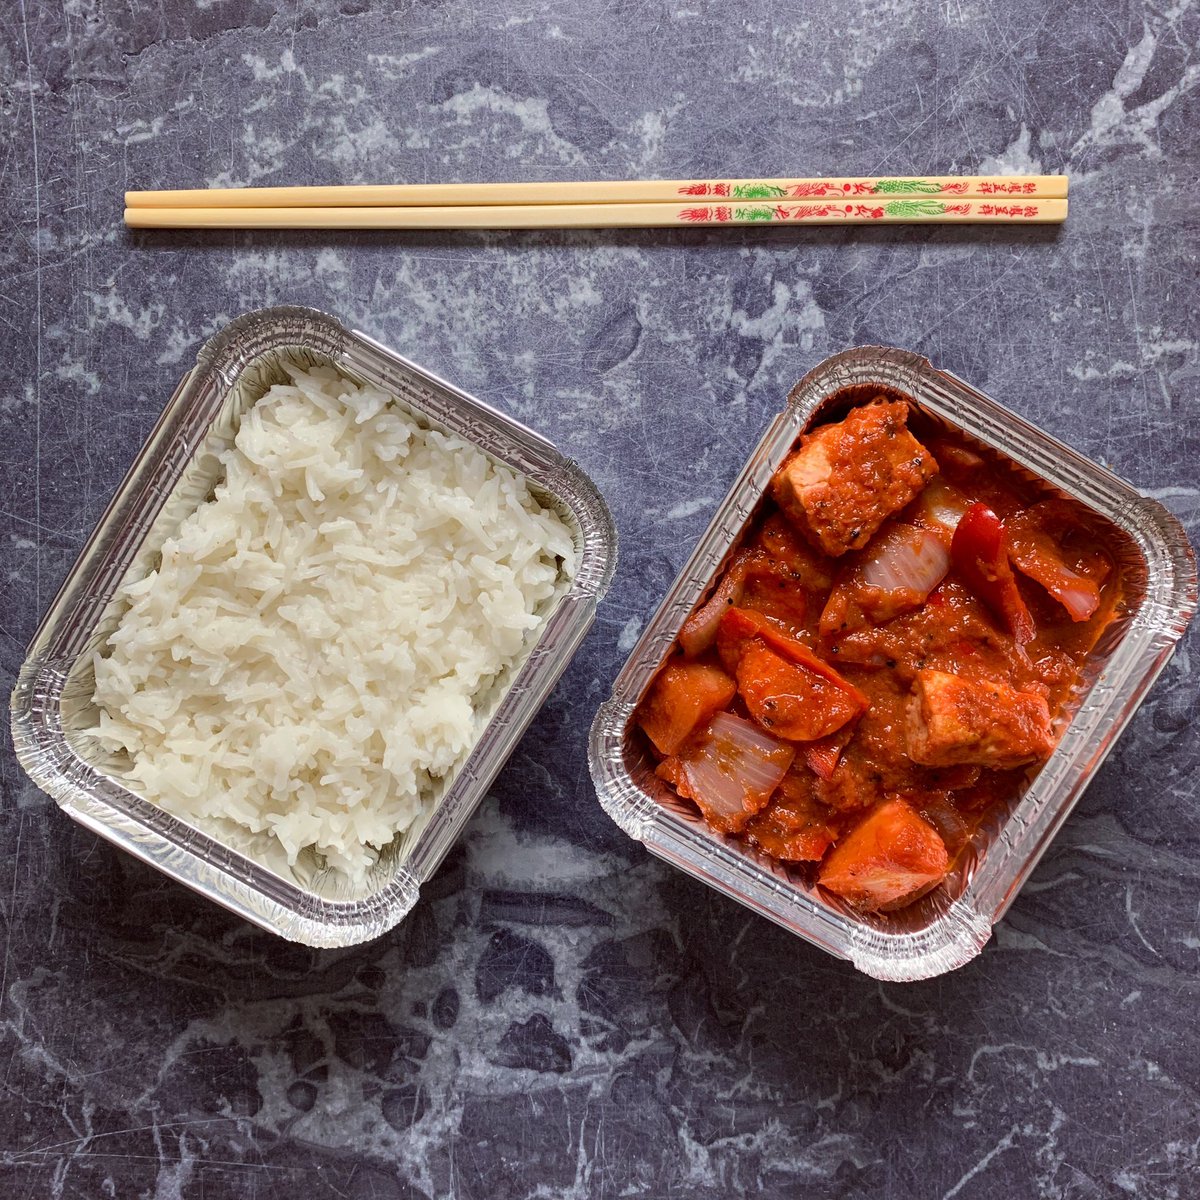 One of my faves from the upcoming book, this twist on Sweet & Sour gives you 4 of your 10-a-day per serving, even if you’re feeling lazy (like me right now) and make it with plain white rice🤫#jameswong #10adaytheeasyway #ffitfood #food #recipedeveloper #5aday #10aday #eatmoreveg